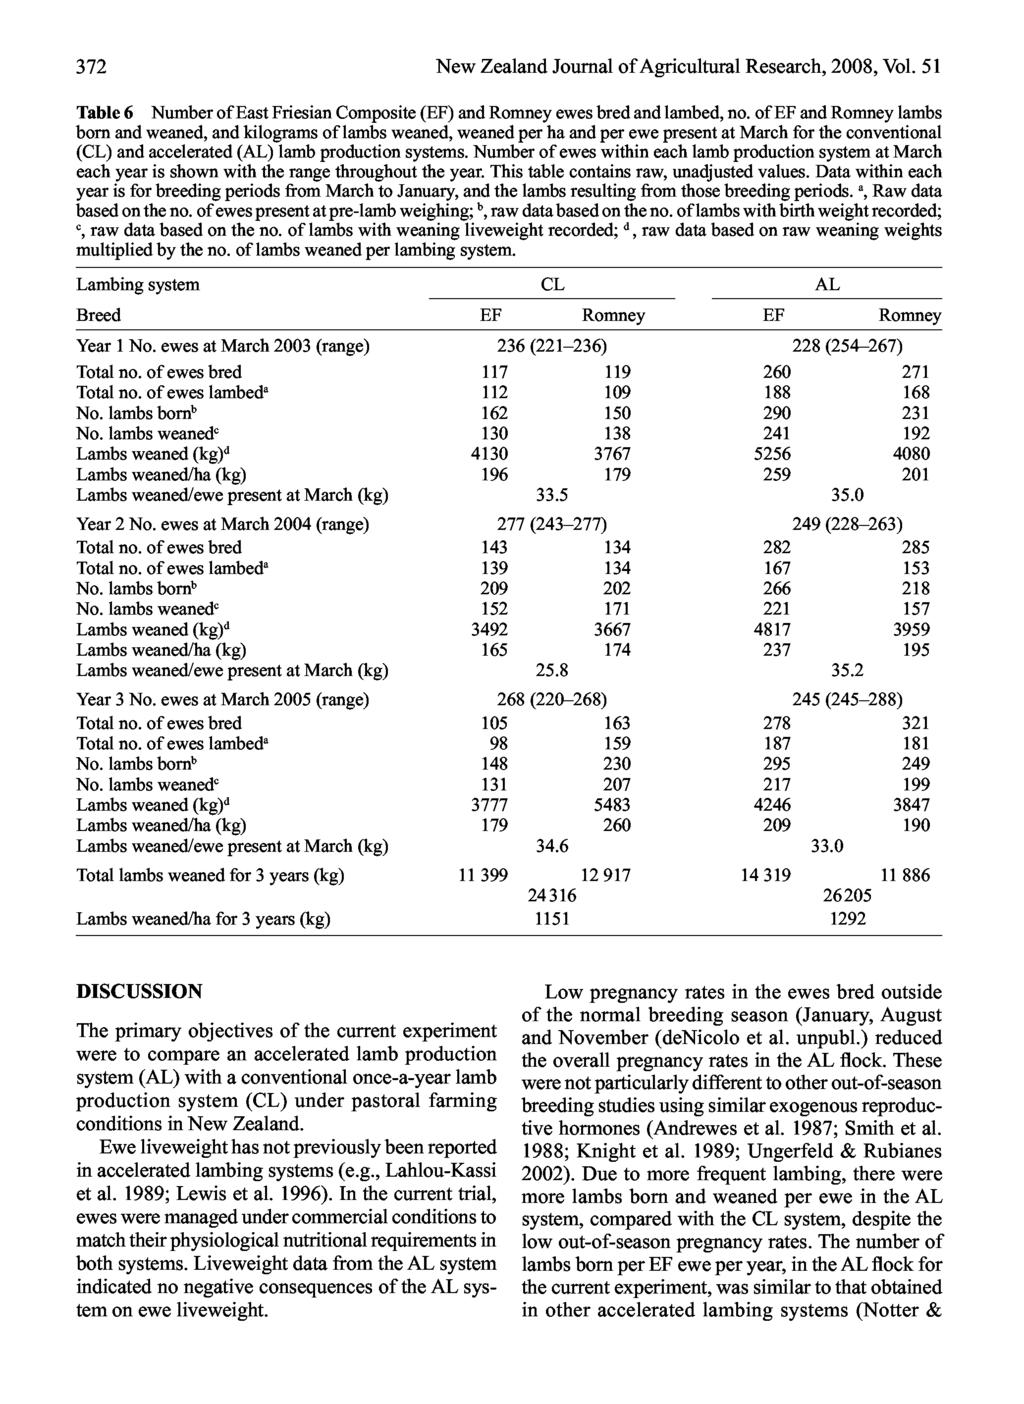 372 New Zealand Journal of Agricultural Research, 2008, Vol. 51 Table 6 Number of east Friesian composite (ef) and ewes bred and lambed, no.